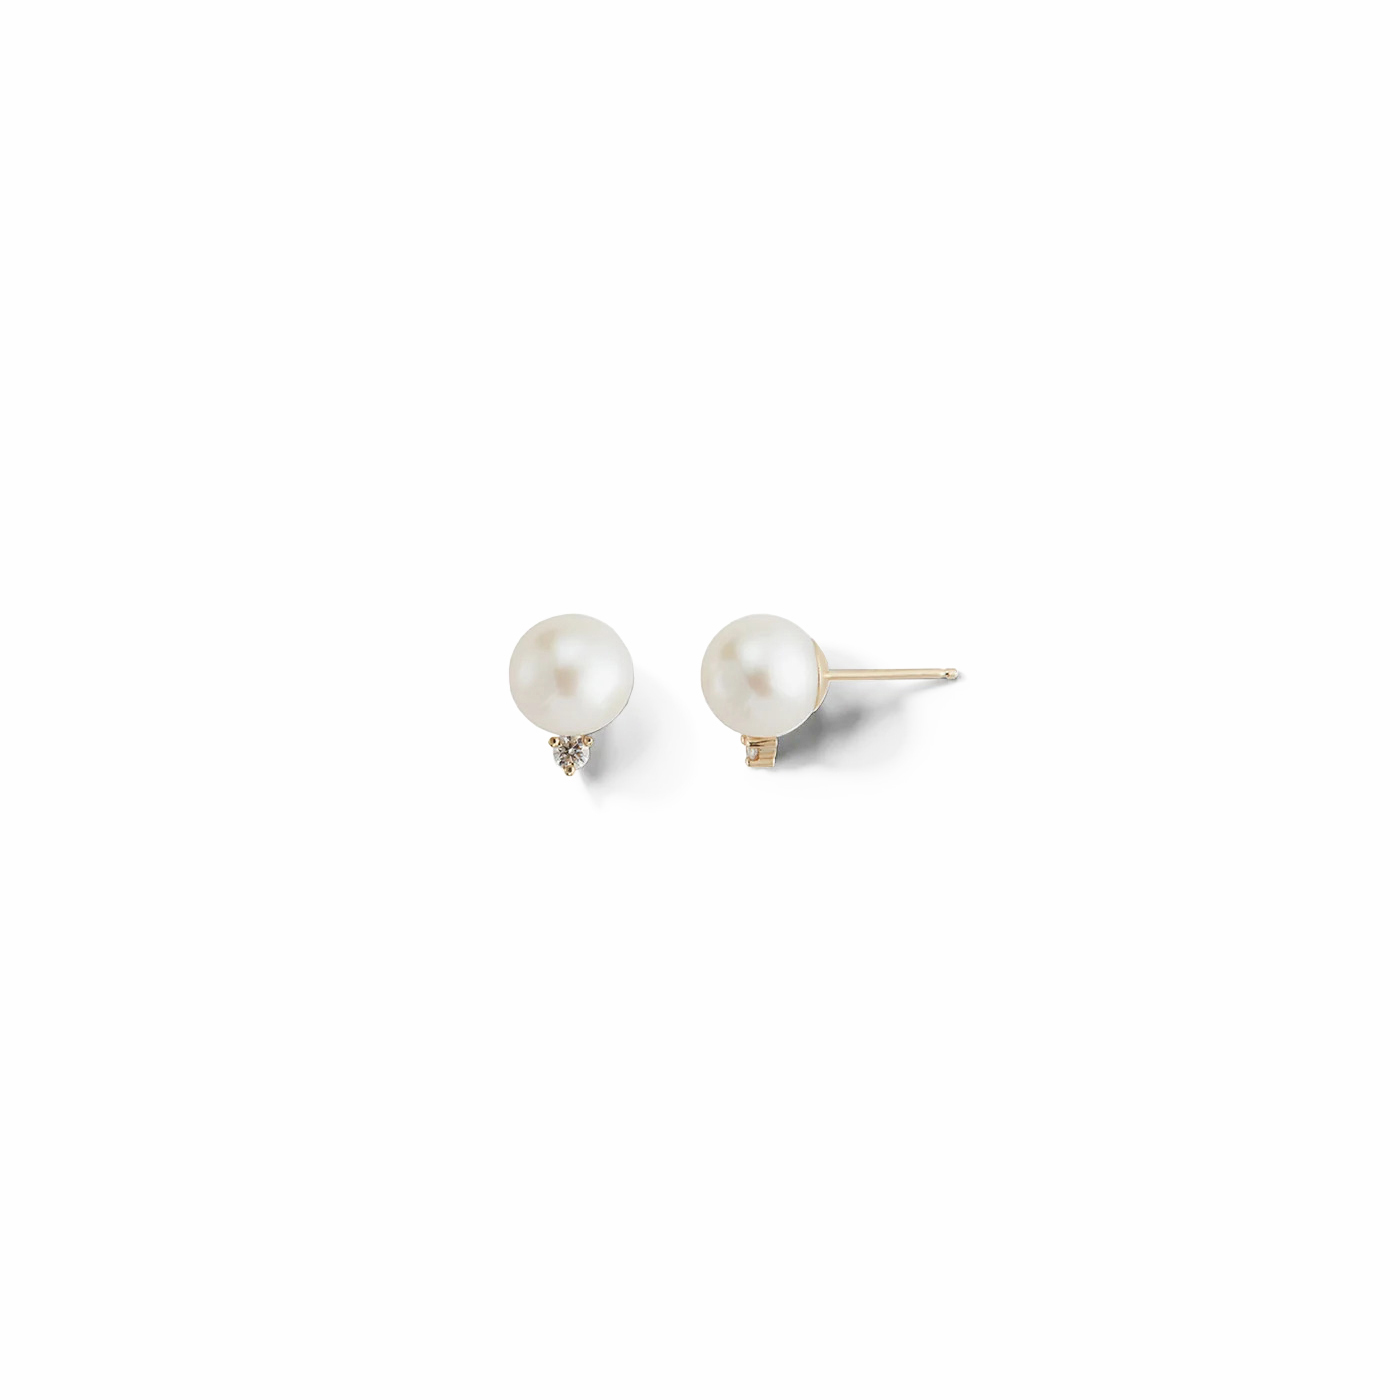 LARGE PEARL AND DIAMOND 14 - carat gold stud earrings